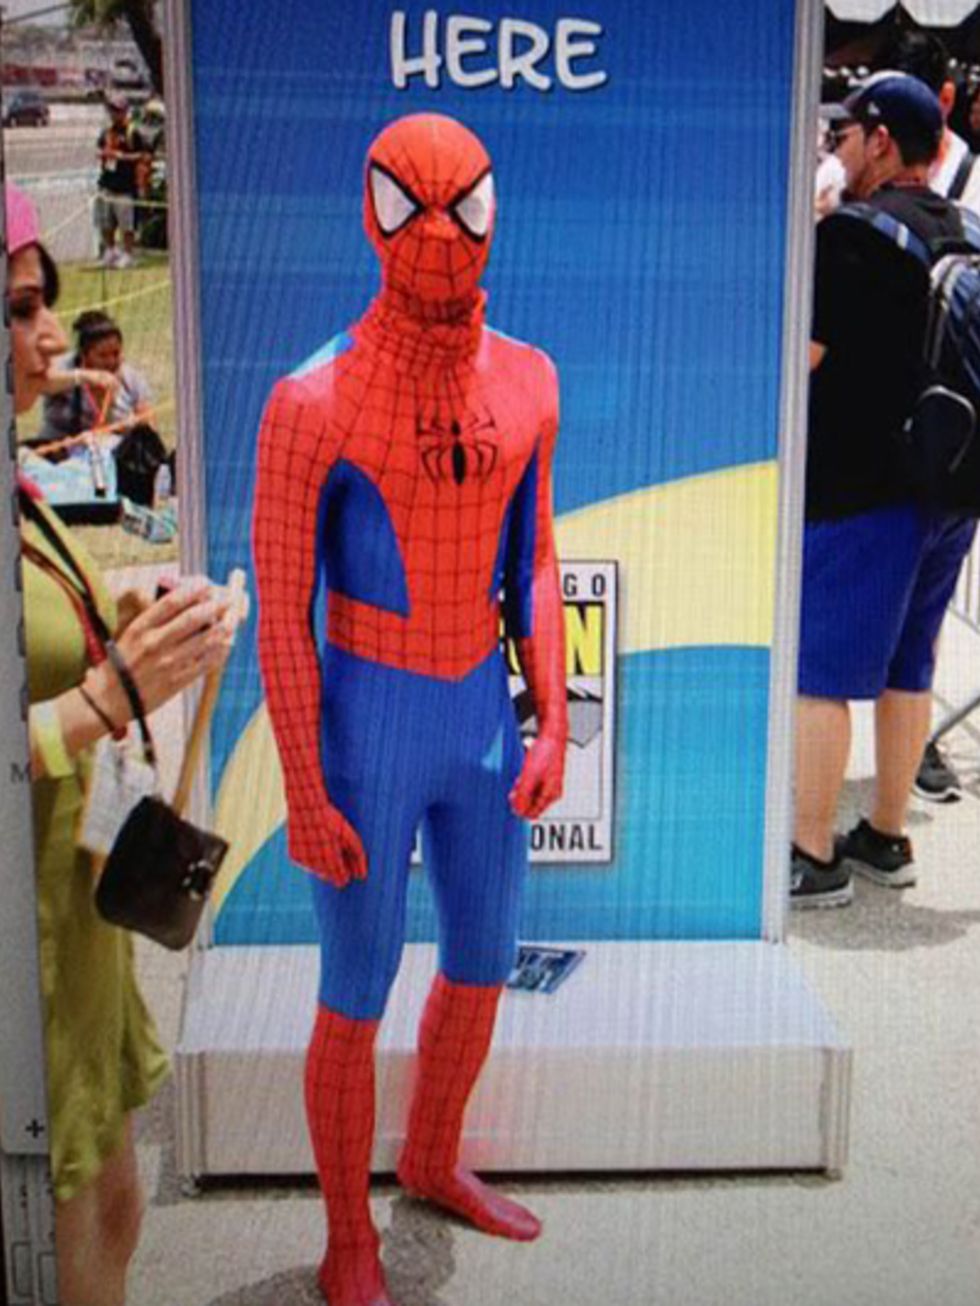 Spider-man, Human leg, Standing, Fictional character, Chest, Carmine, Costume, Luggage and bags, Trunk, Superhero, 